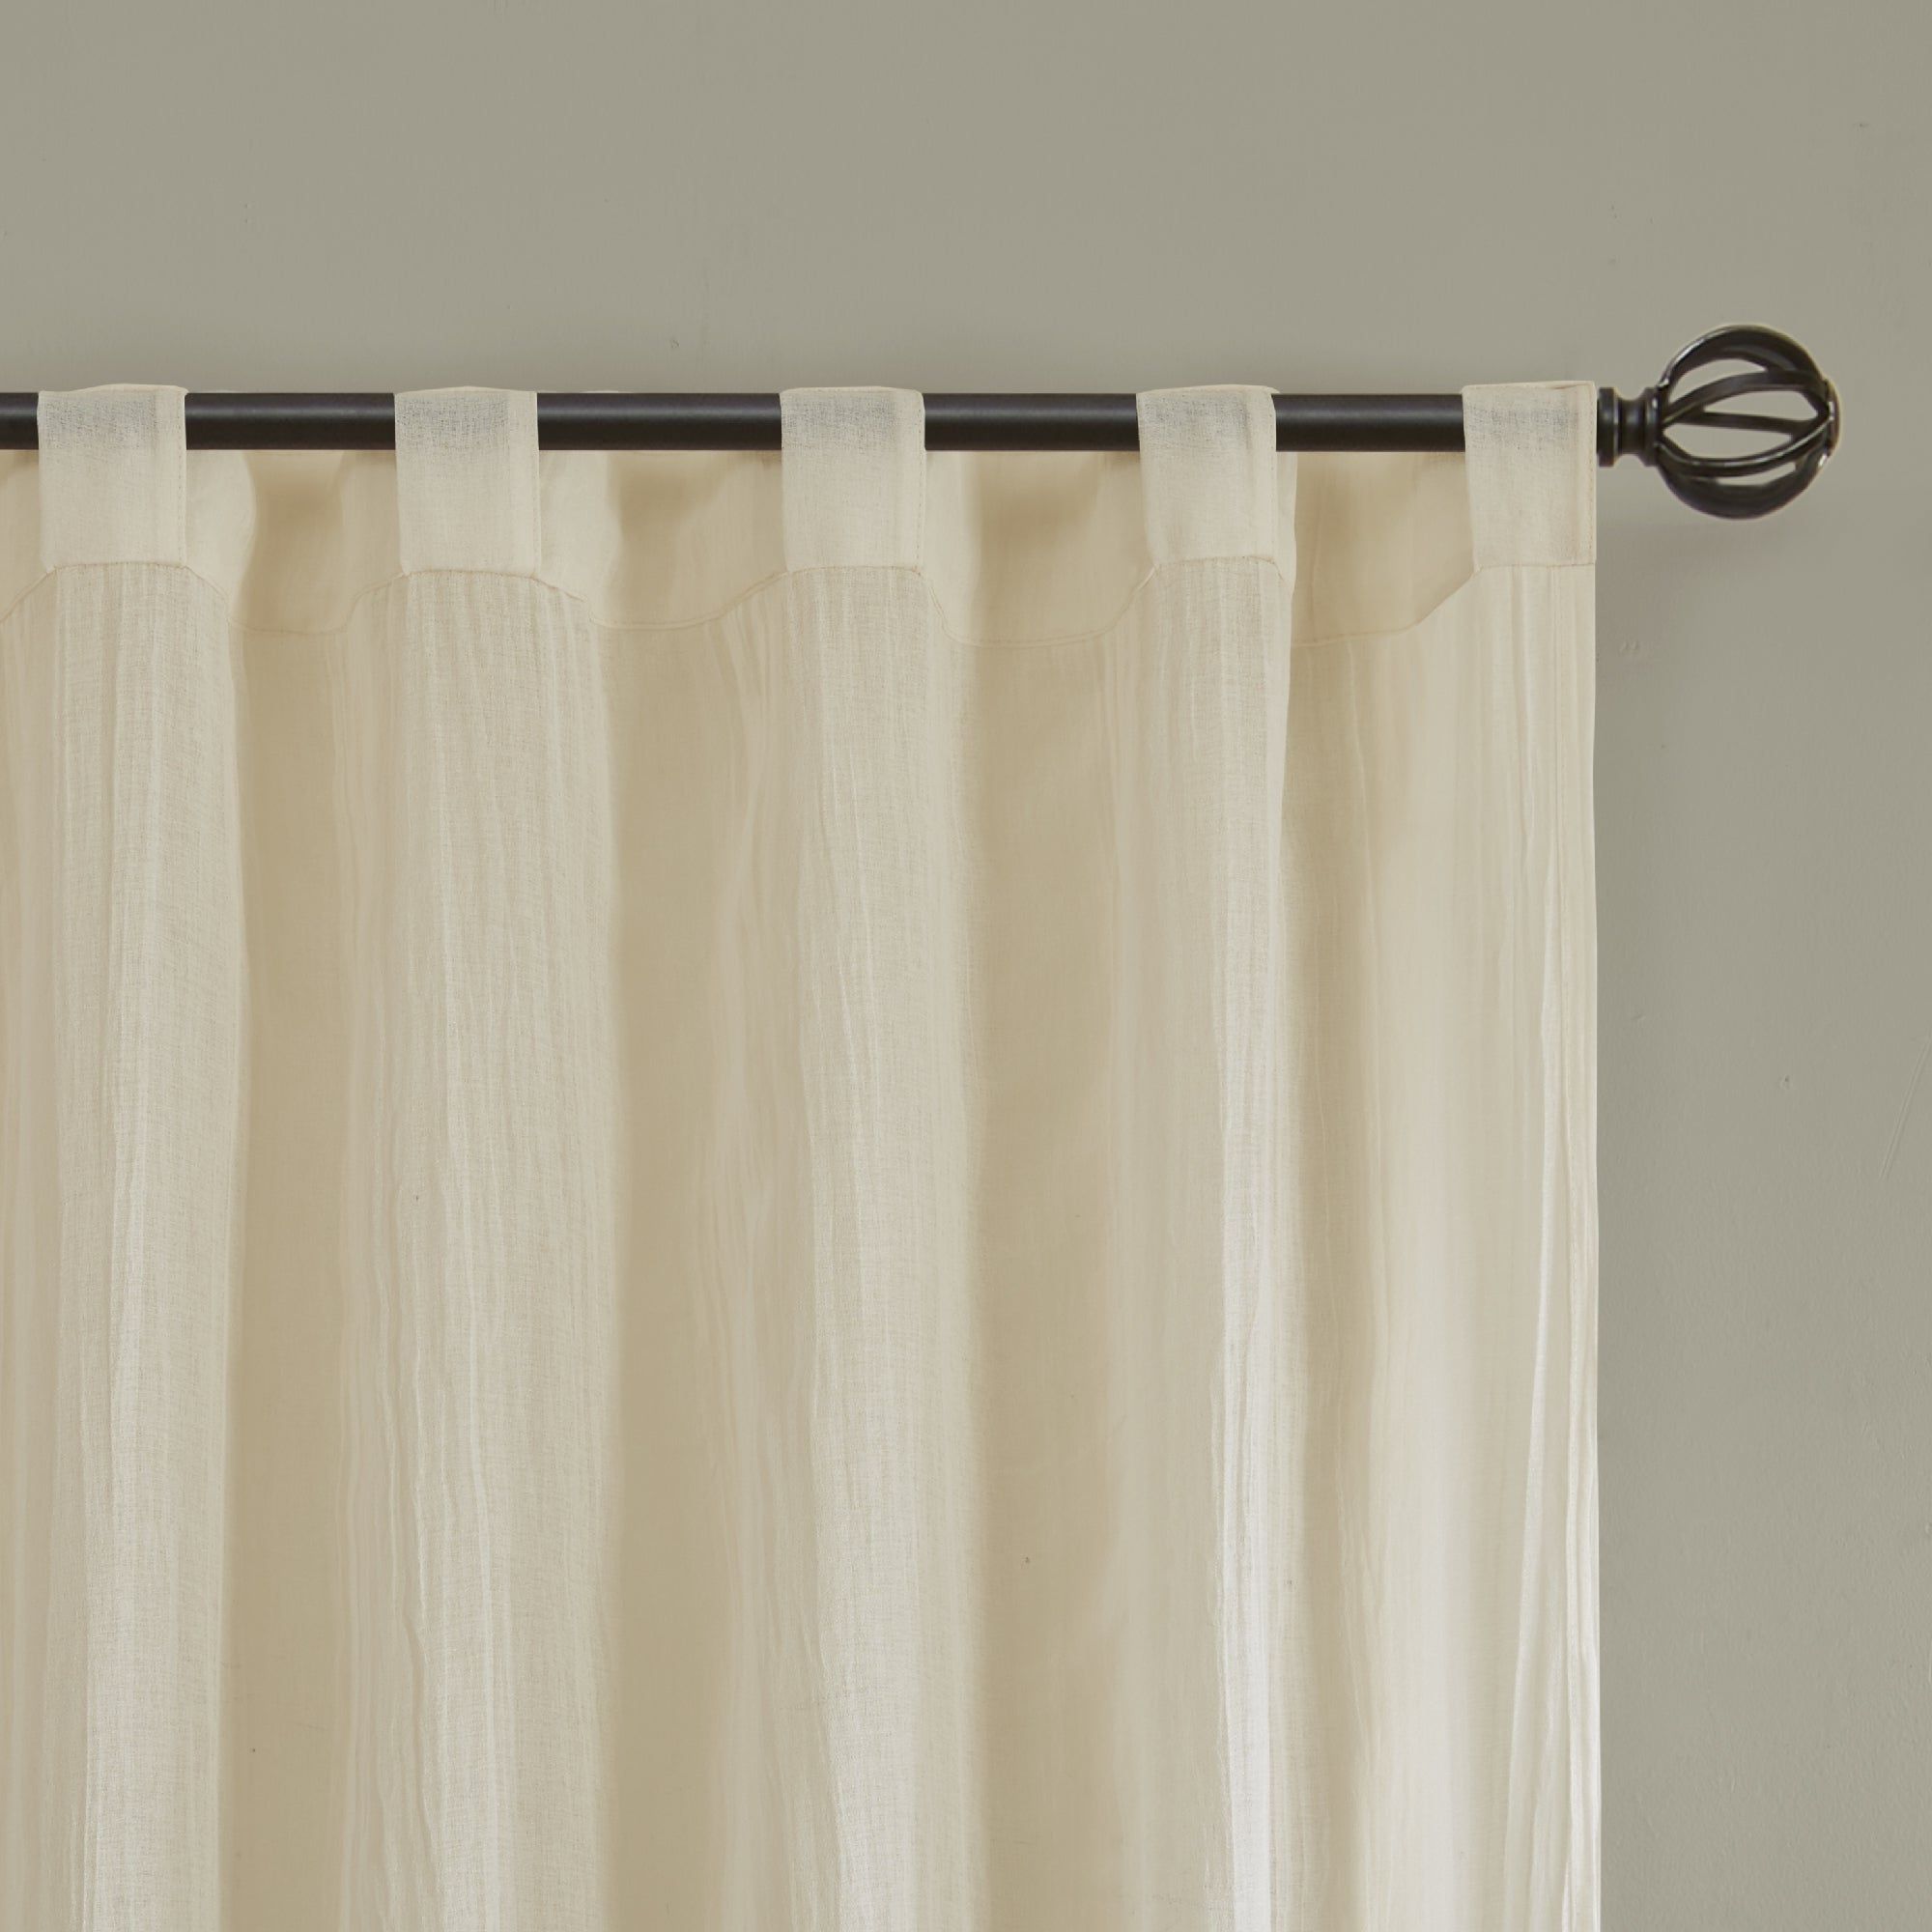 Kaylee Solid Crushed Sheer Window Curtain Pairs Inside Most Recent Madison Park Kaylee Solid Crushed Sheer Window Curtain Pair (View 6 of 20)